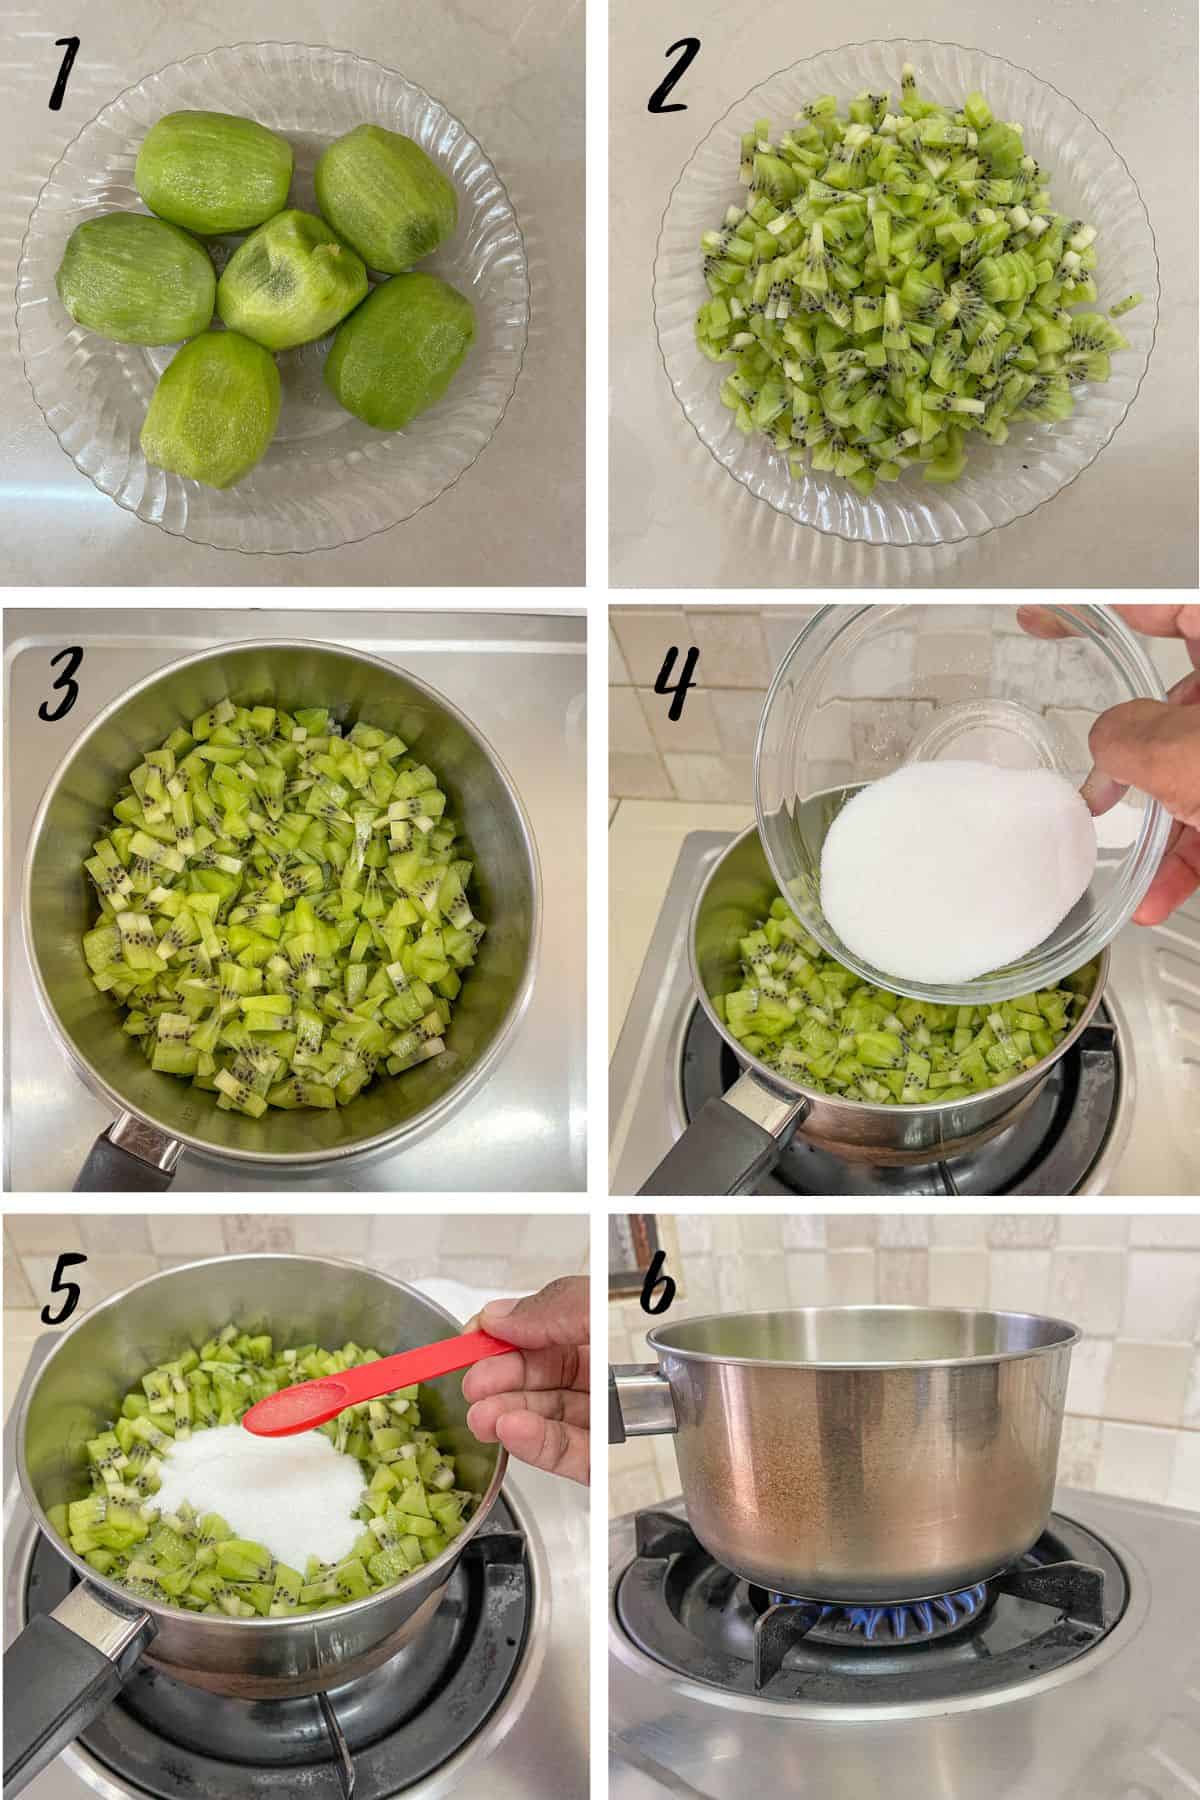 A poster of 6 images showing how to cook kiwi fruits.